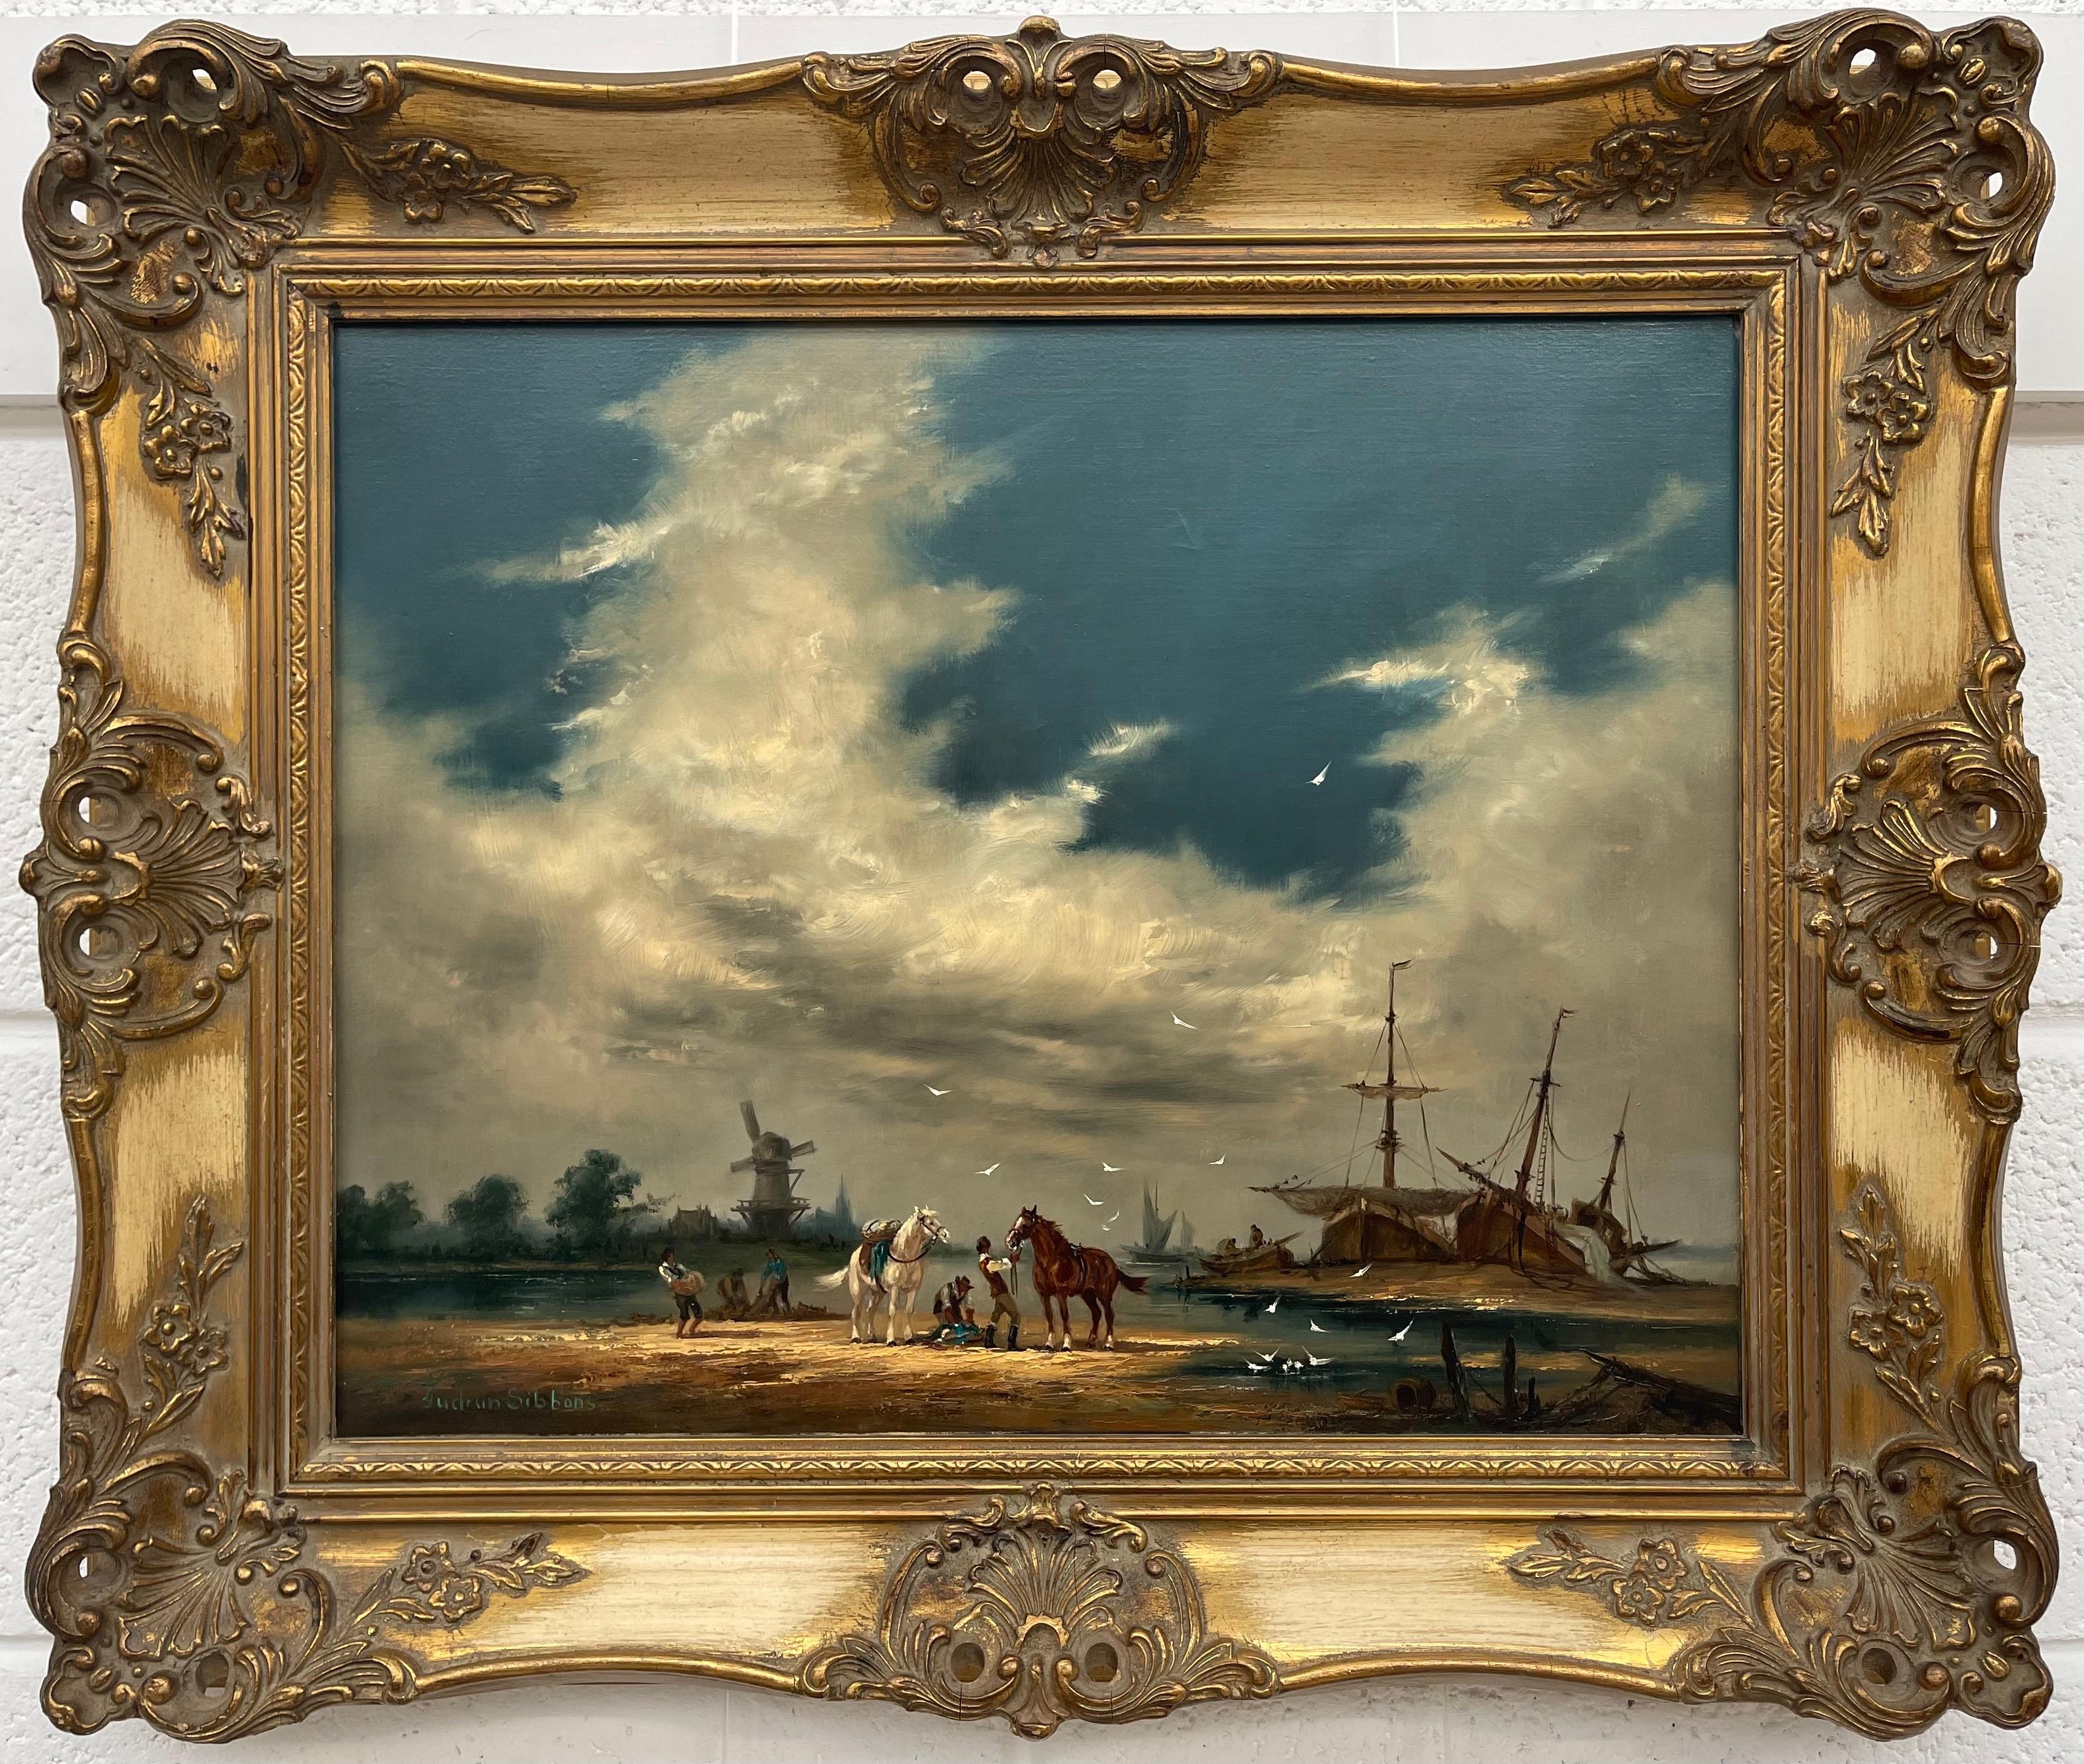 Oil Painting of Dutch Estuary Boat Scene with Horses & Figures by British Artist
Oil on Board, Signed. Framed in an ornate moulding. 

Art measures 20 x 16 inches
Frame measures 26 x 22 inches

Gudrun Sibbons is a German-born British artist best